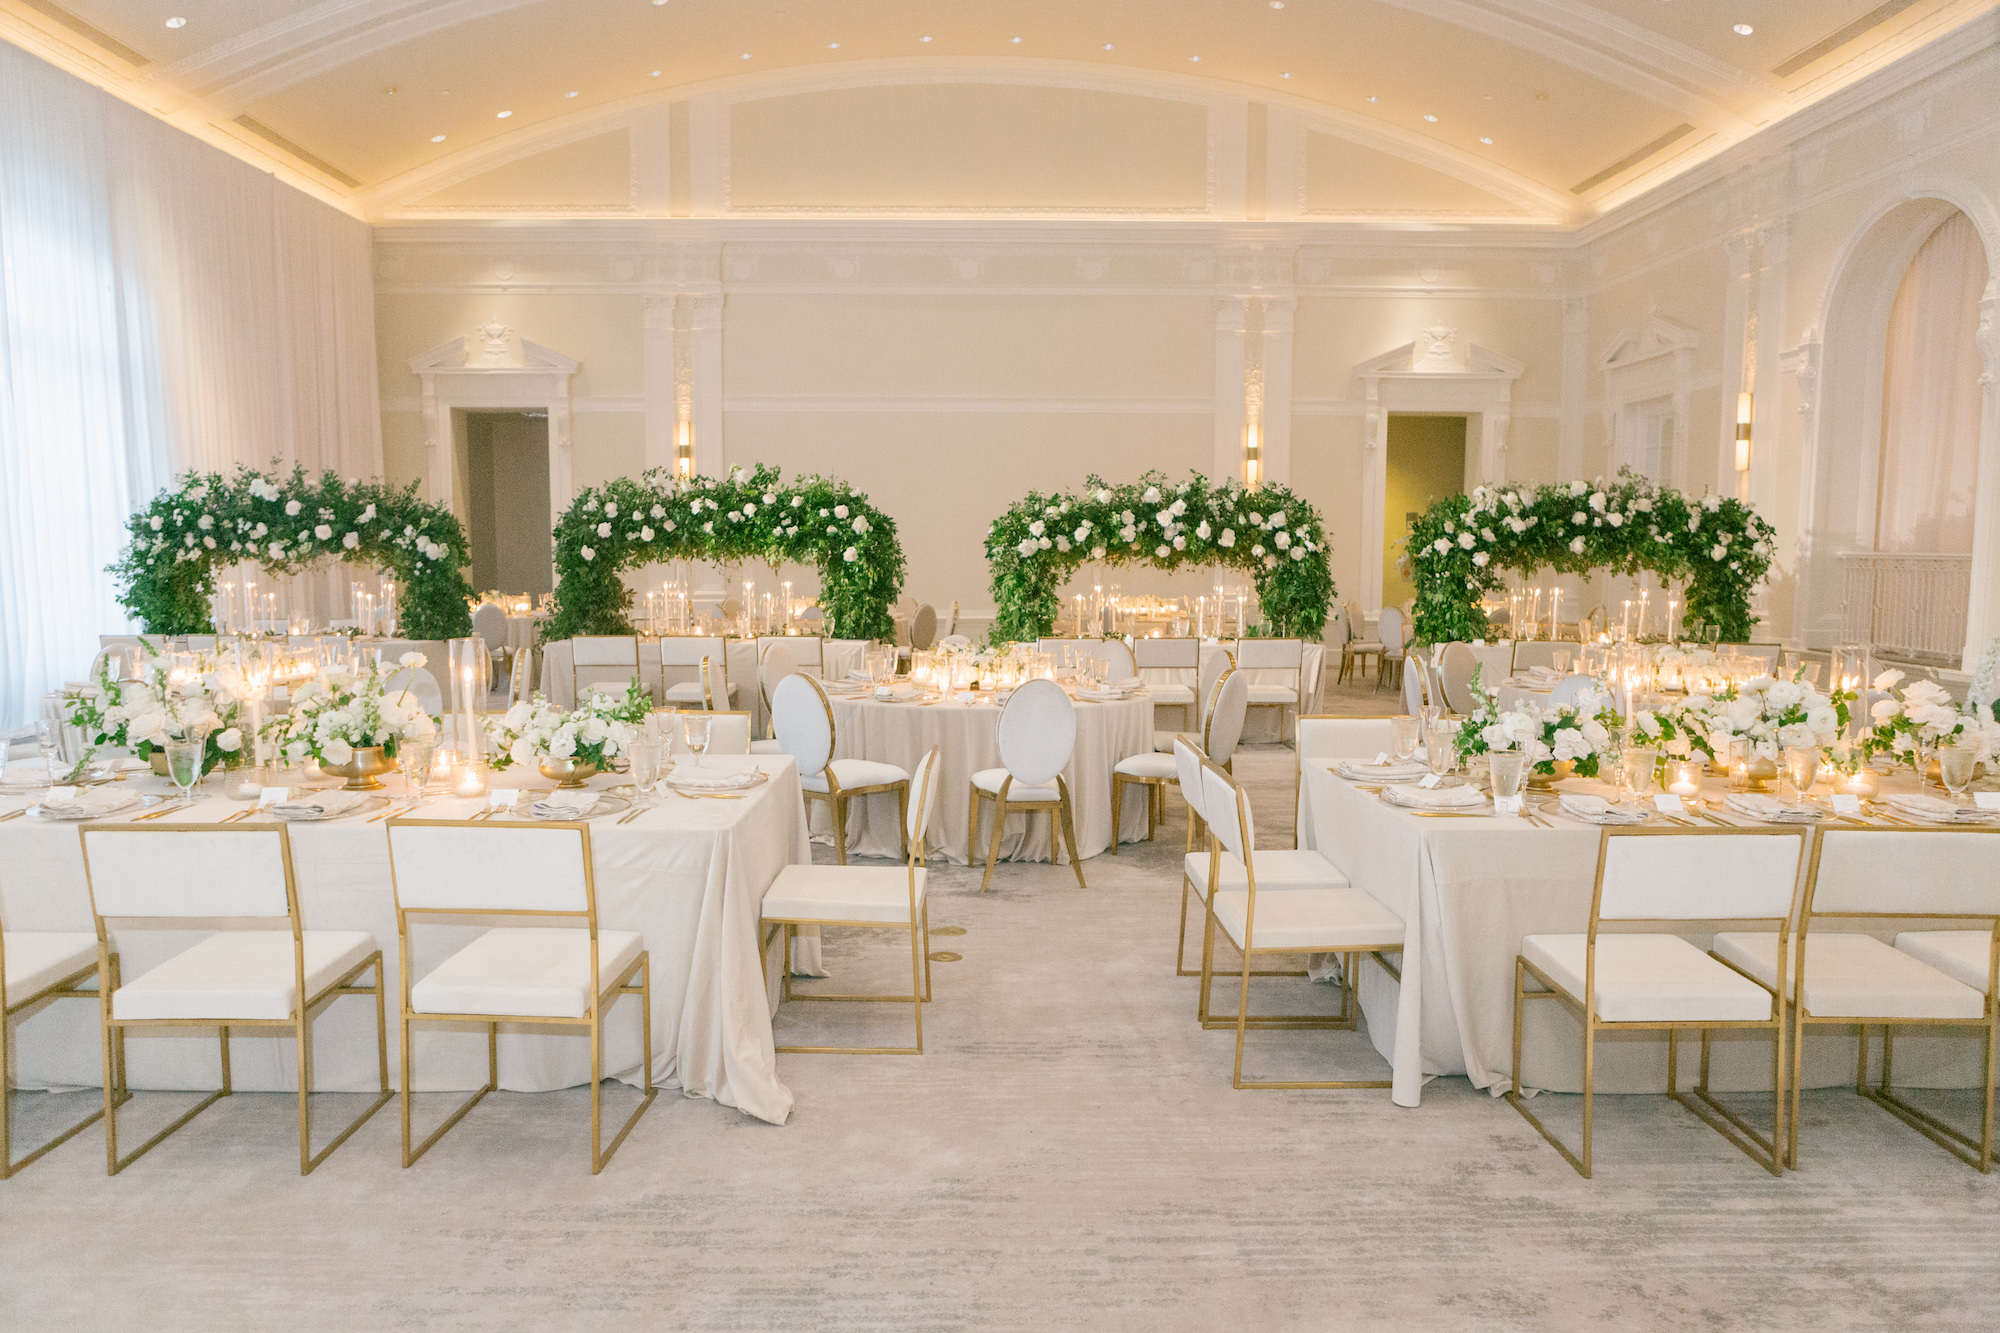 Luxurious White and Gold Wedding Reception Floral Inspiration with Greenery | St Petersburg Ballroom Venue The Vinoy Renaissance | Tampa Bay Rental A Chair Affair | St Pete Planner Parties A'La Carte | Over the Top Linen Rental